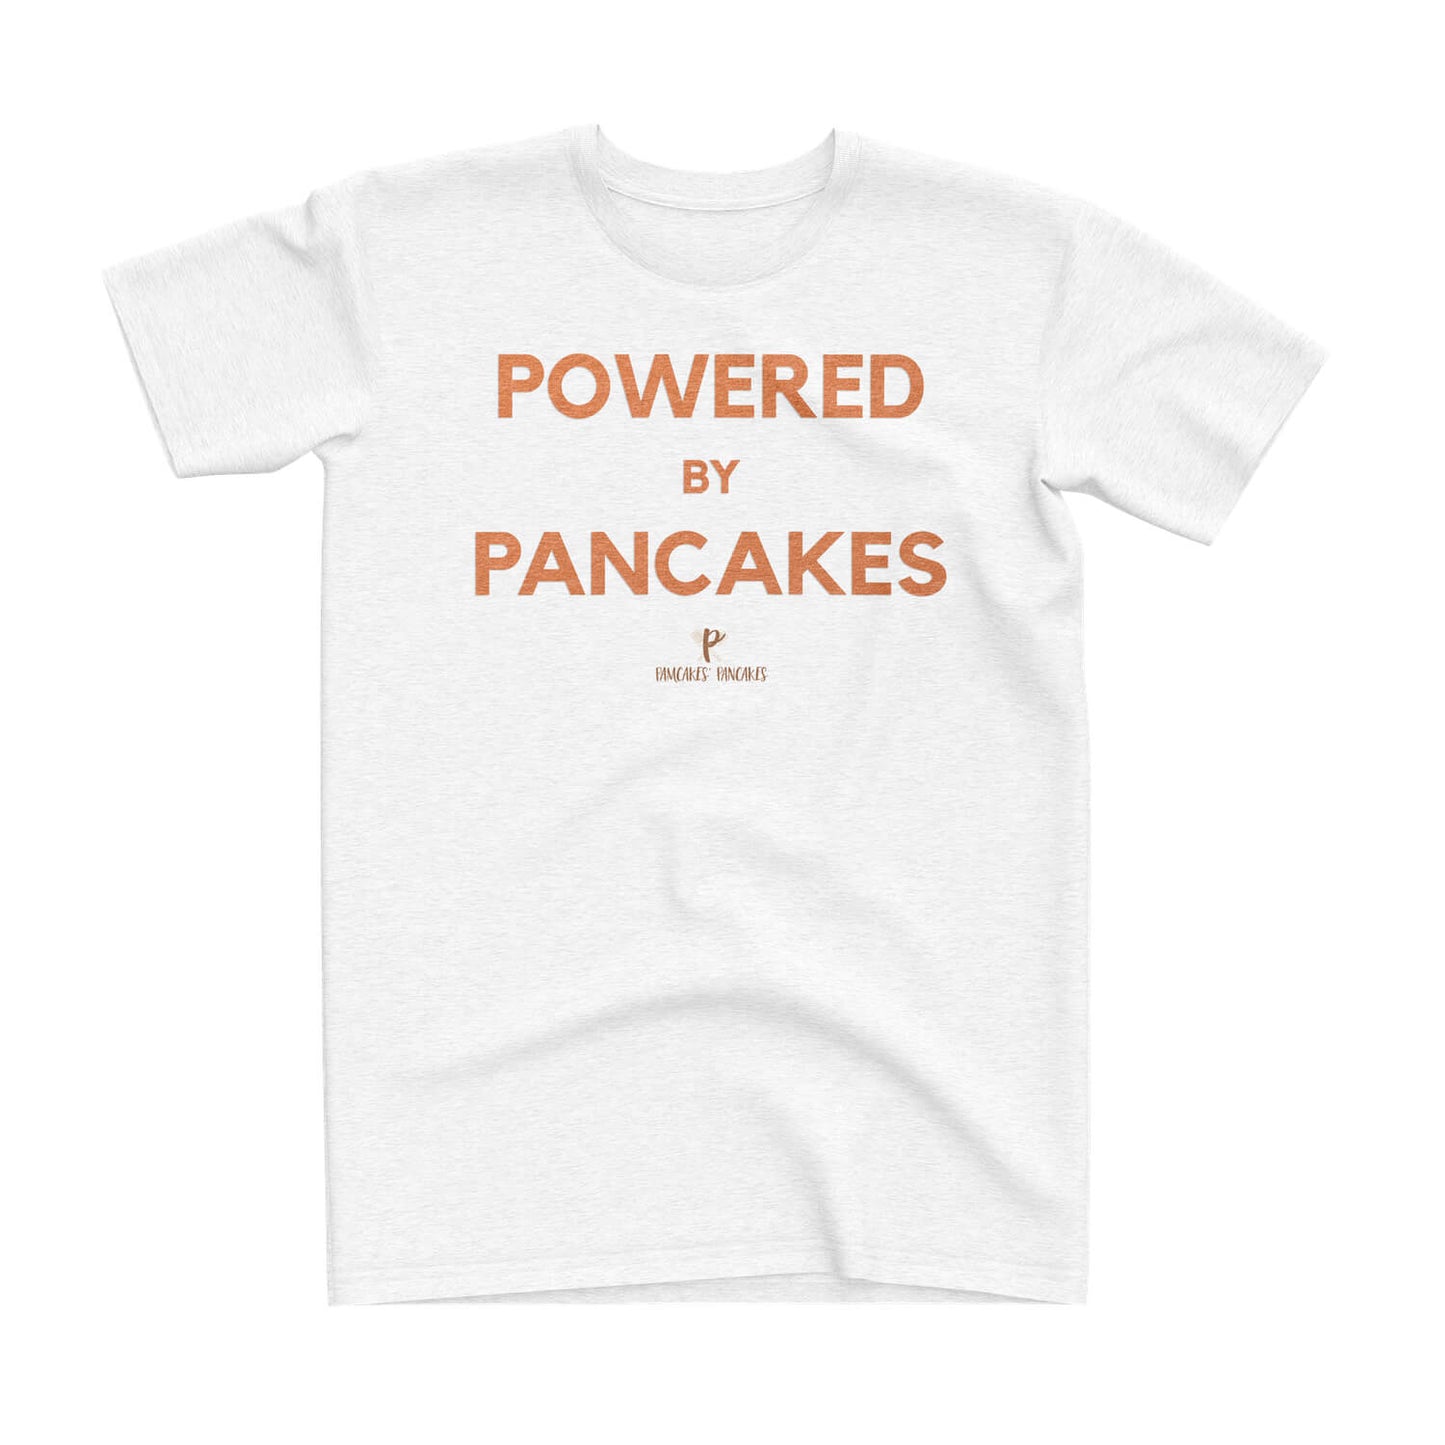 LIMITED EDITION POWERED BY PAMCAKES SHIRT